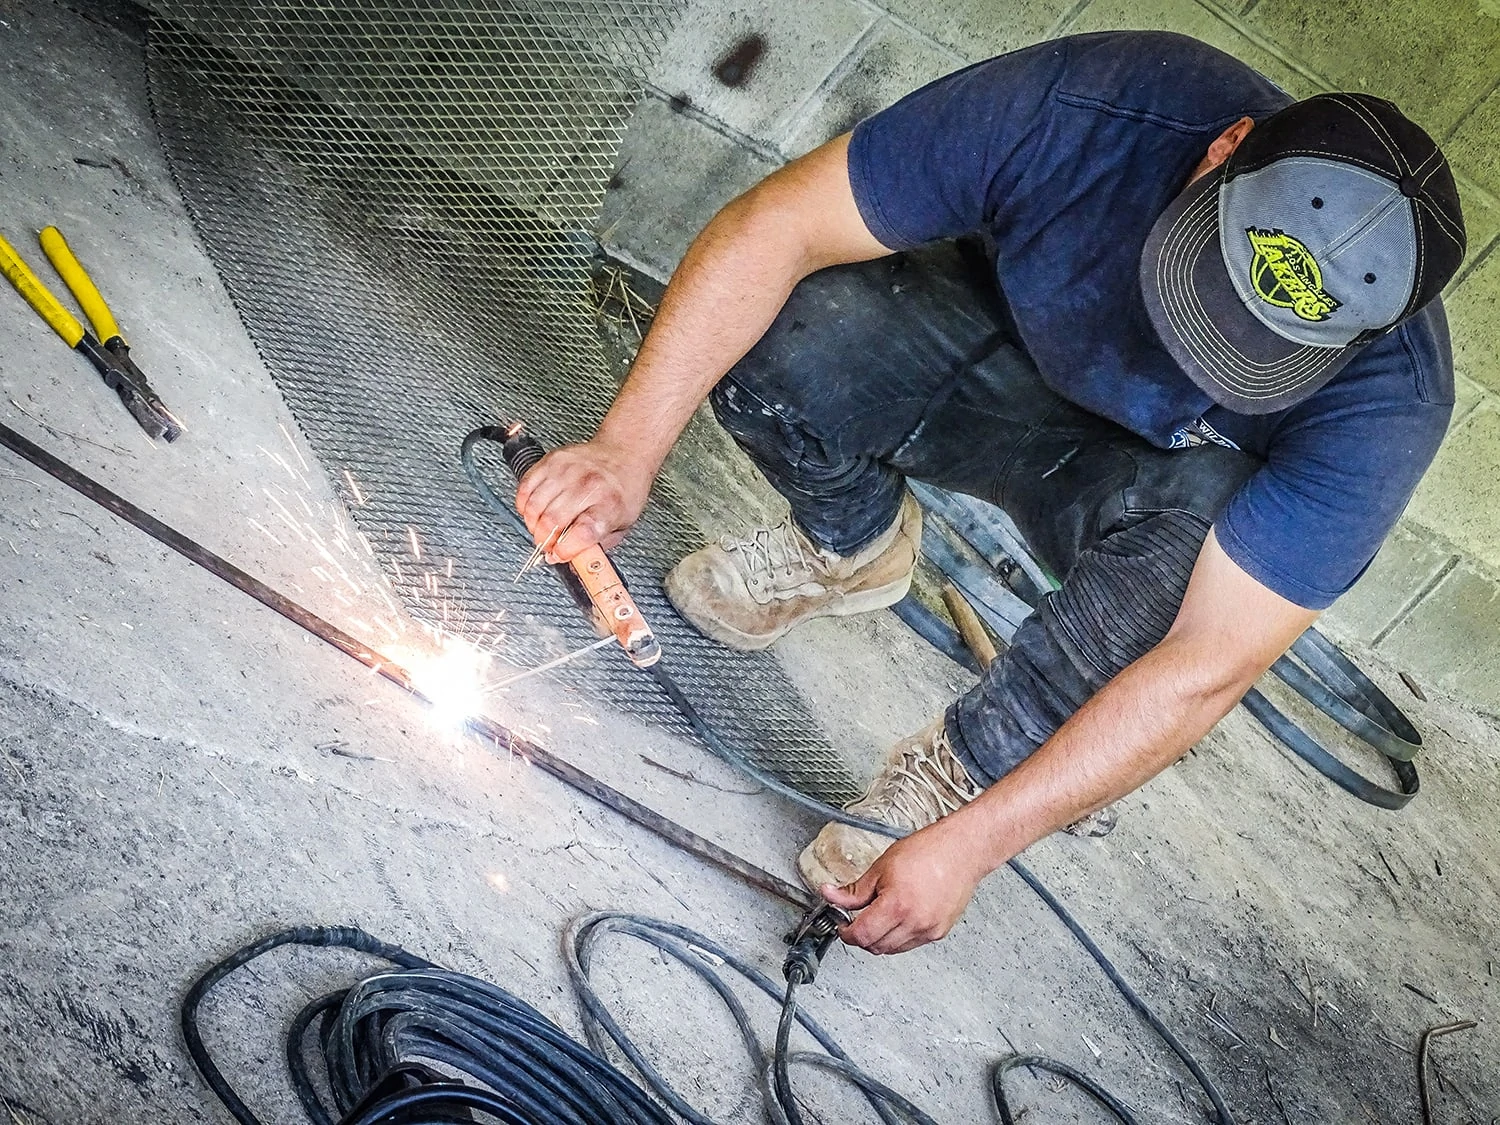 A young man squatting, welding a piece of metal.